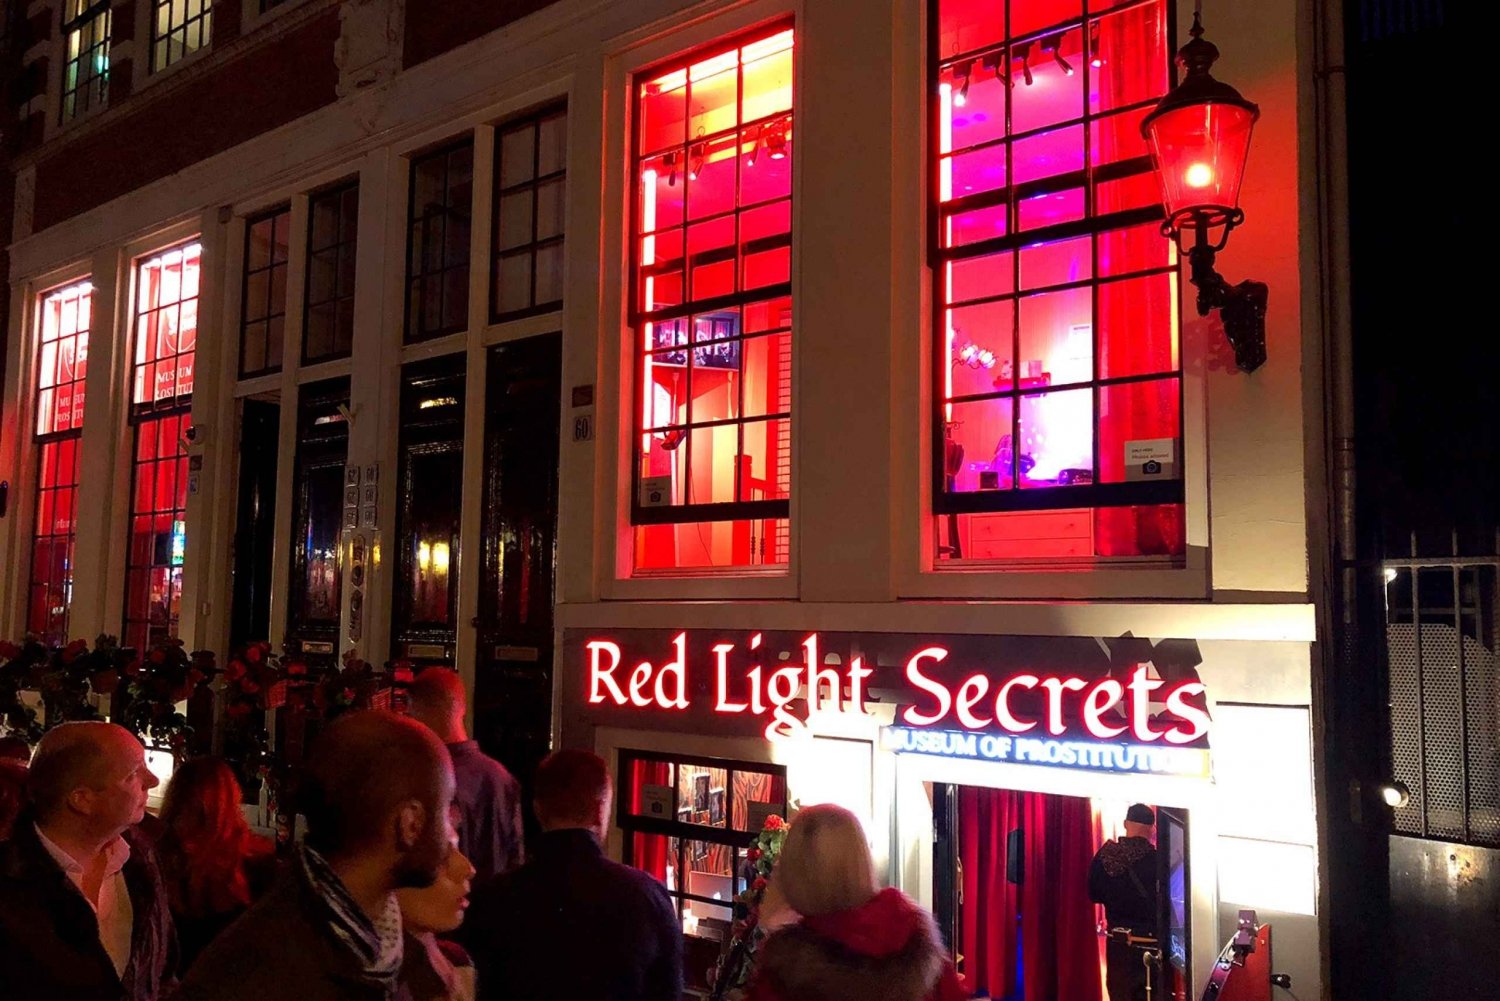 Amsterdam: Red light district tour (small group)